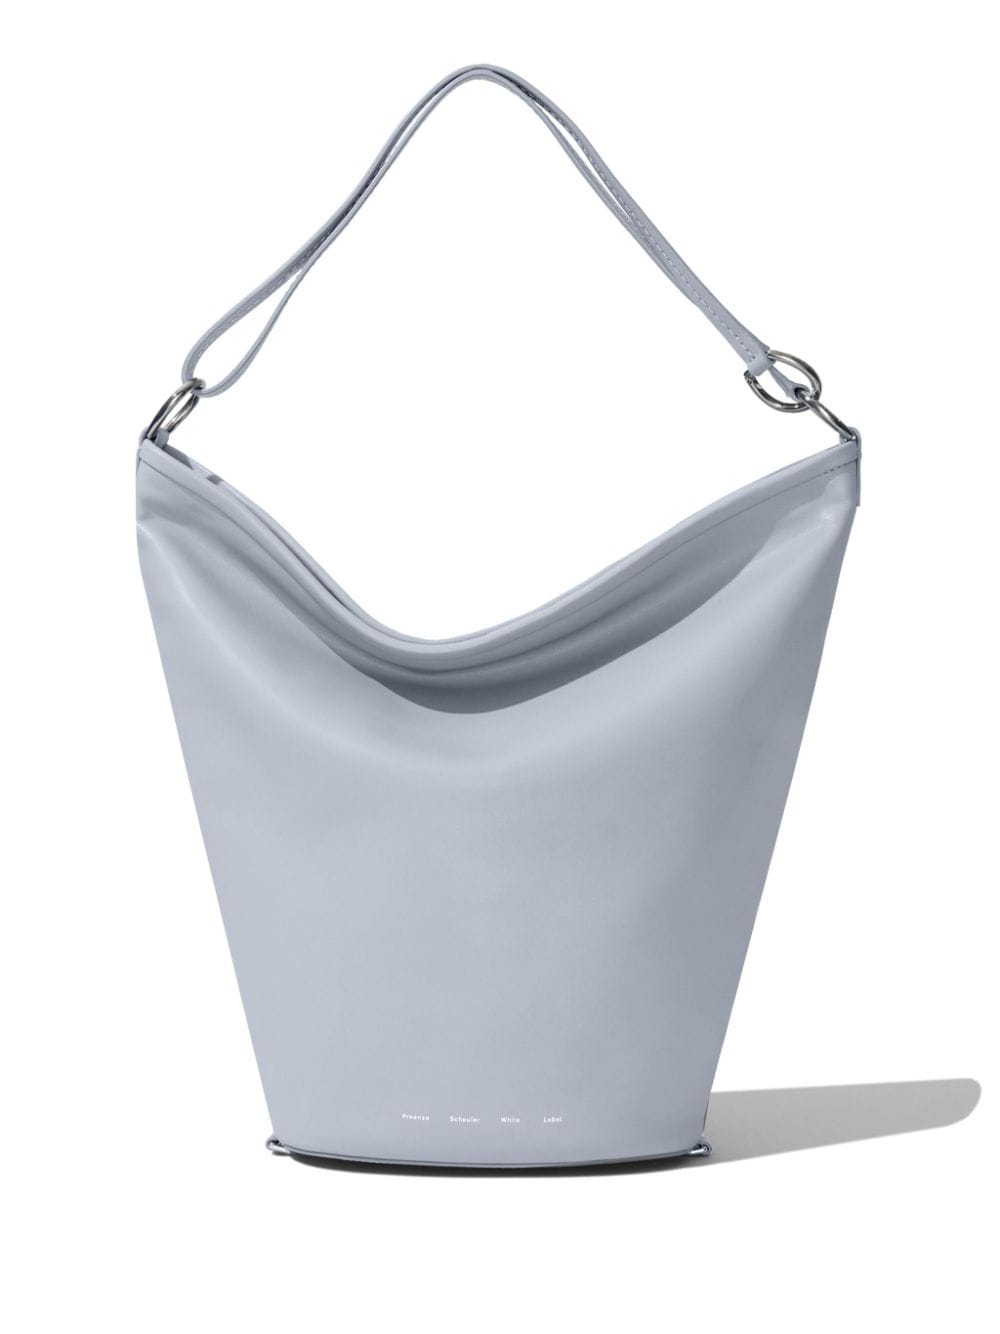 Proenza Schouler White Label Sling leather bucket bag - Blue von Proenza Schouler White Label